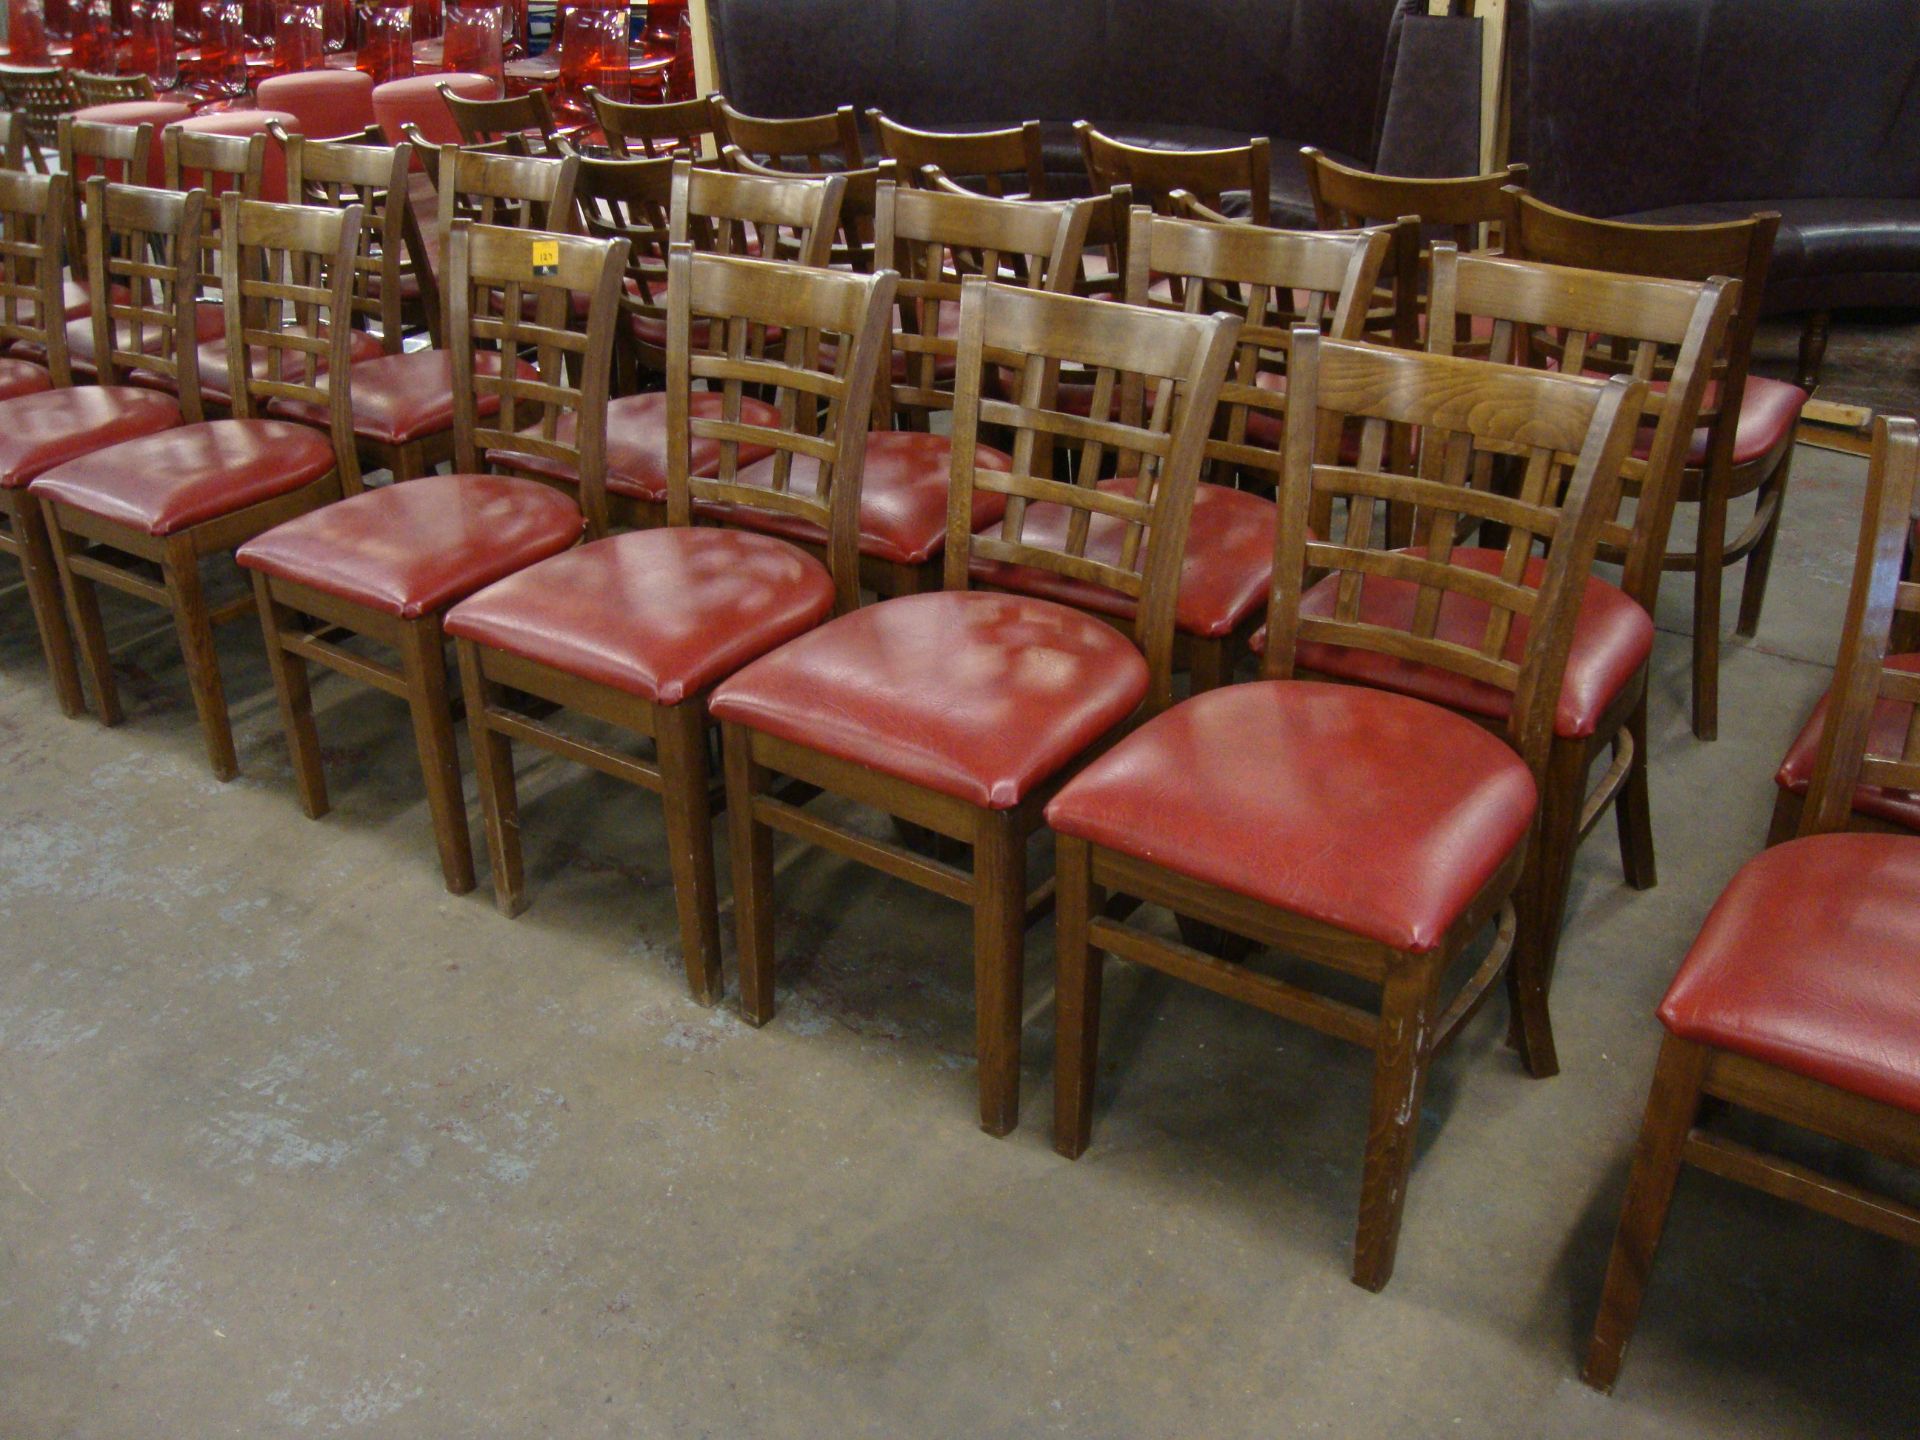 8 off wooden chairs with red upholstered bases. NB lots 121 – 129 consist of different quantities of - Image 2 of 3